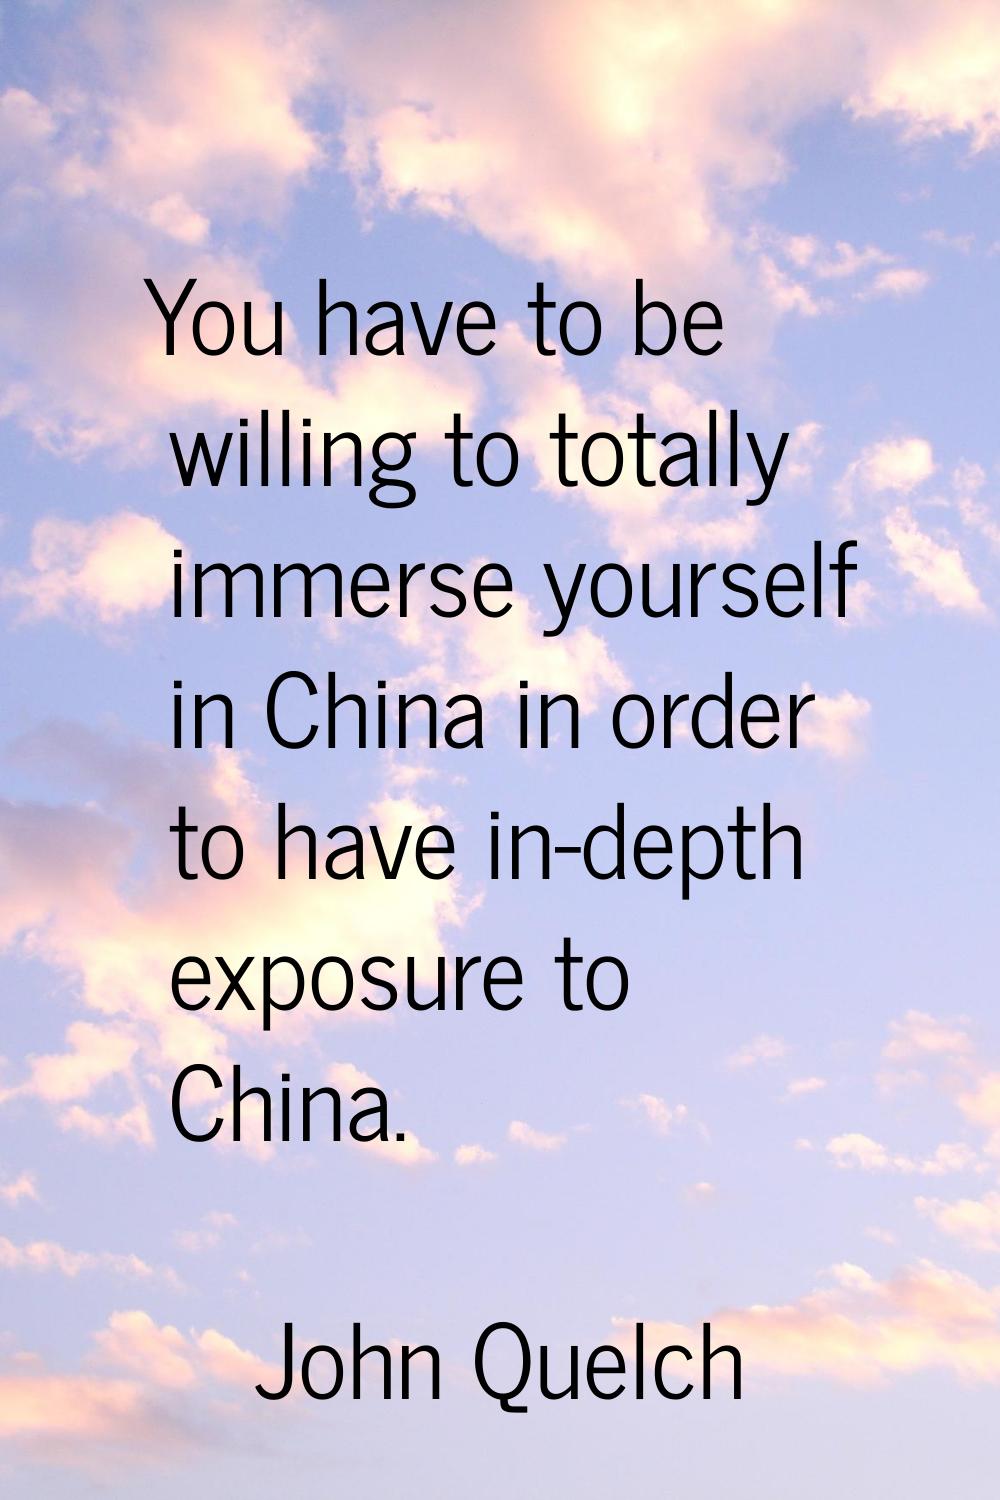 You have to be willing to totally immerse yourself in China in order to have in-depth exposure to C